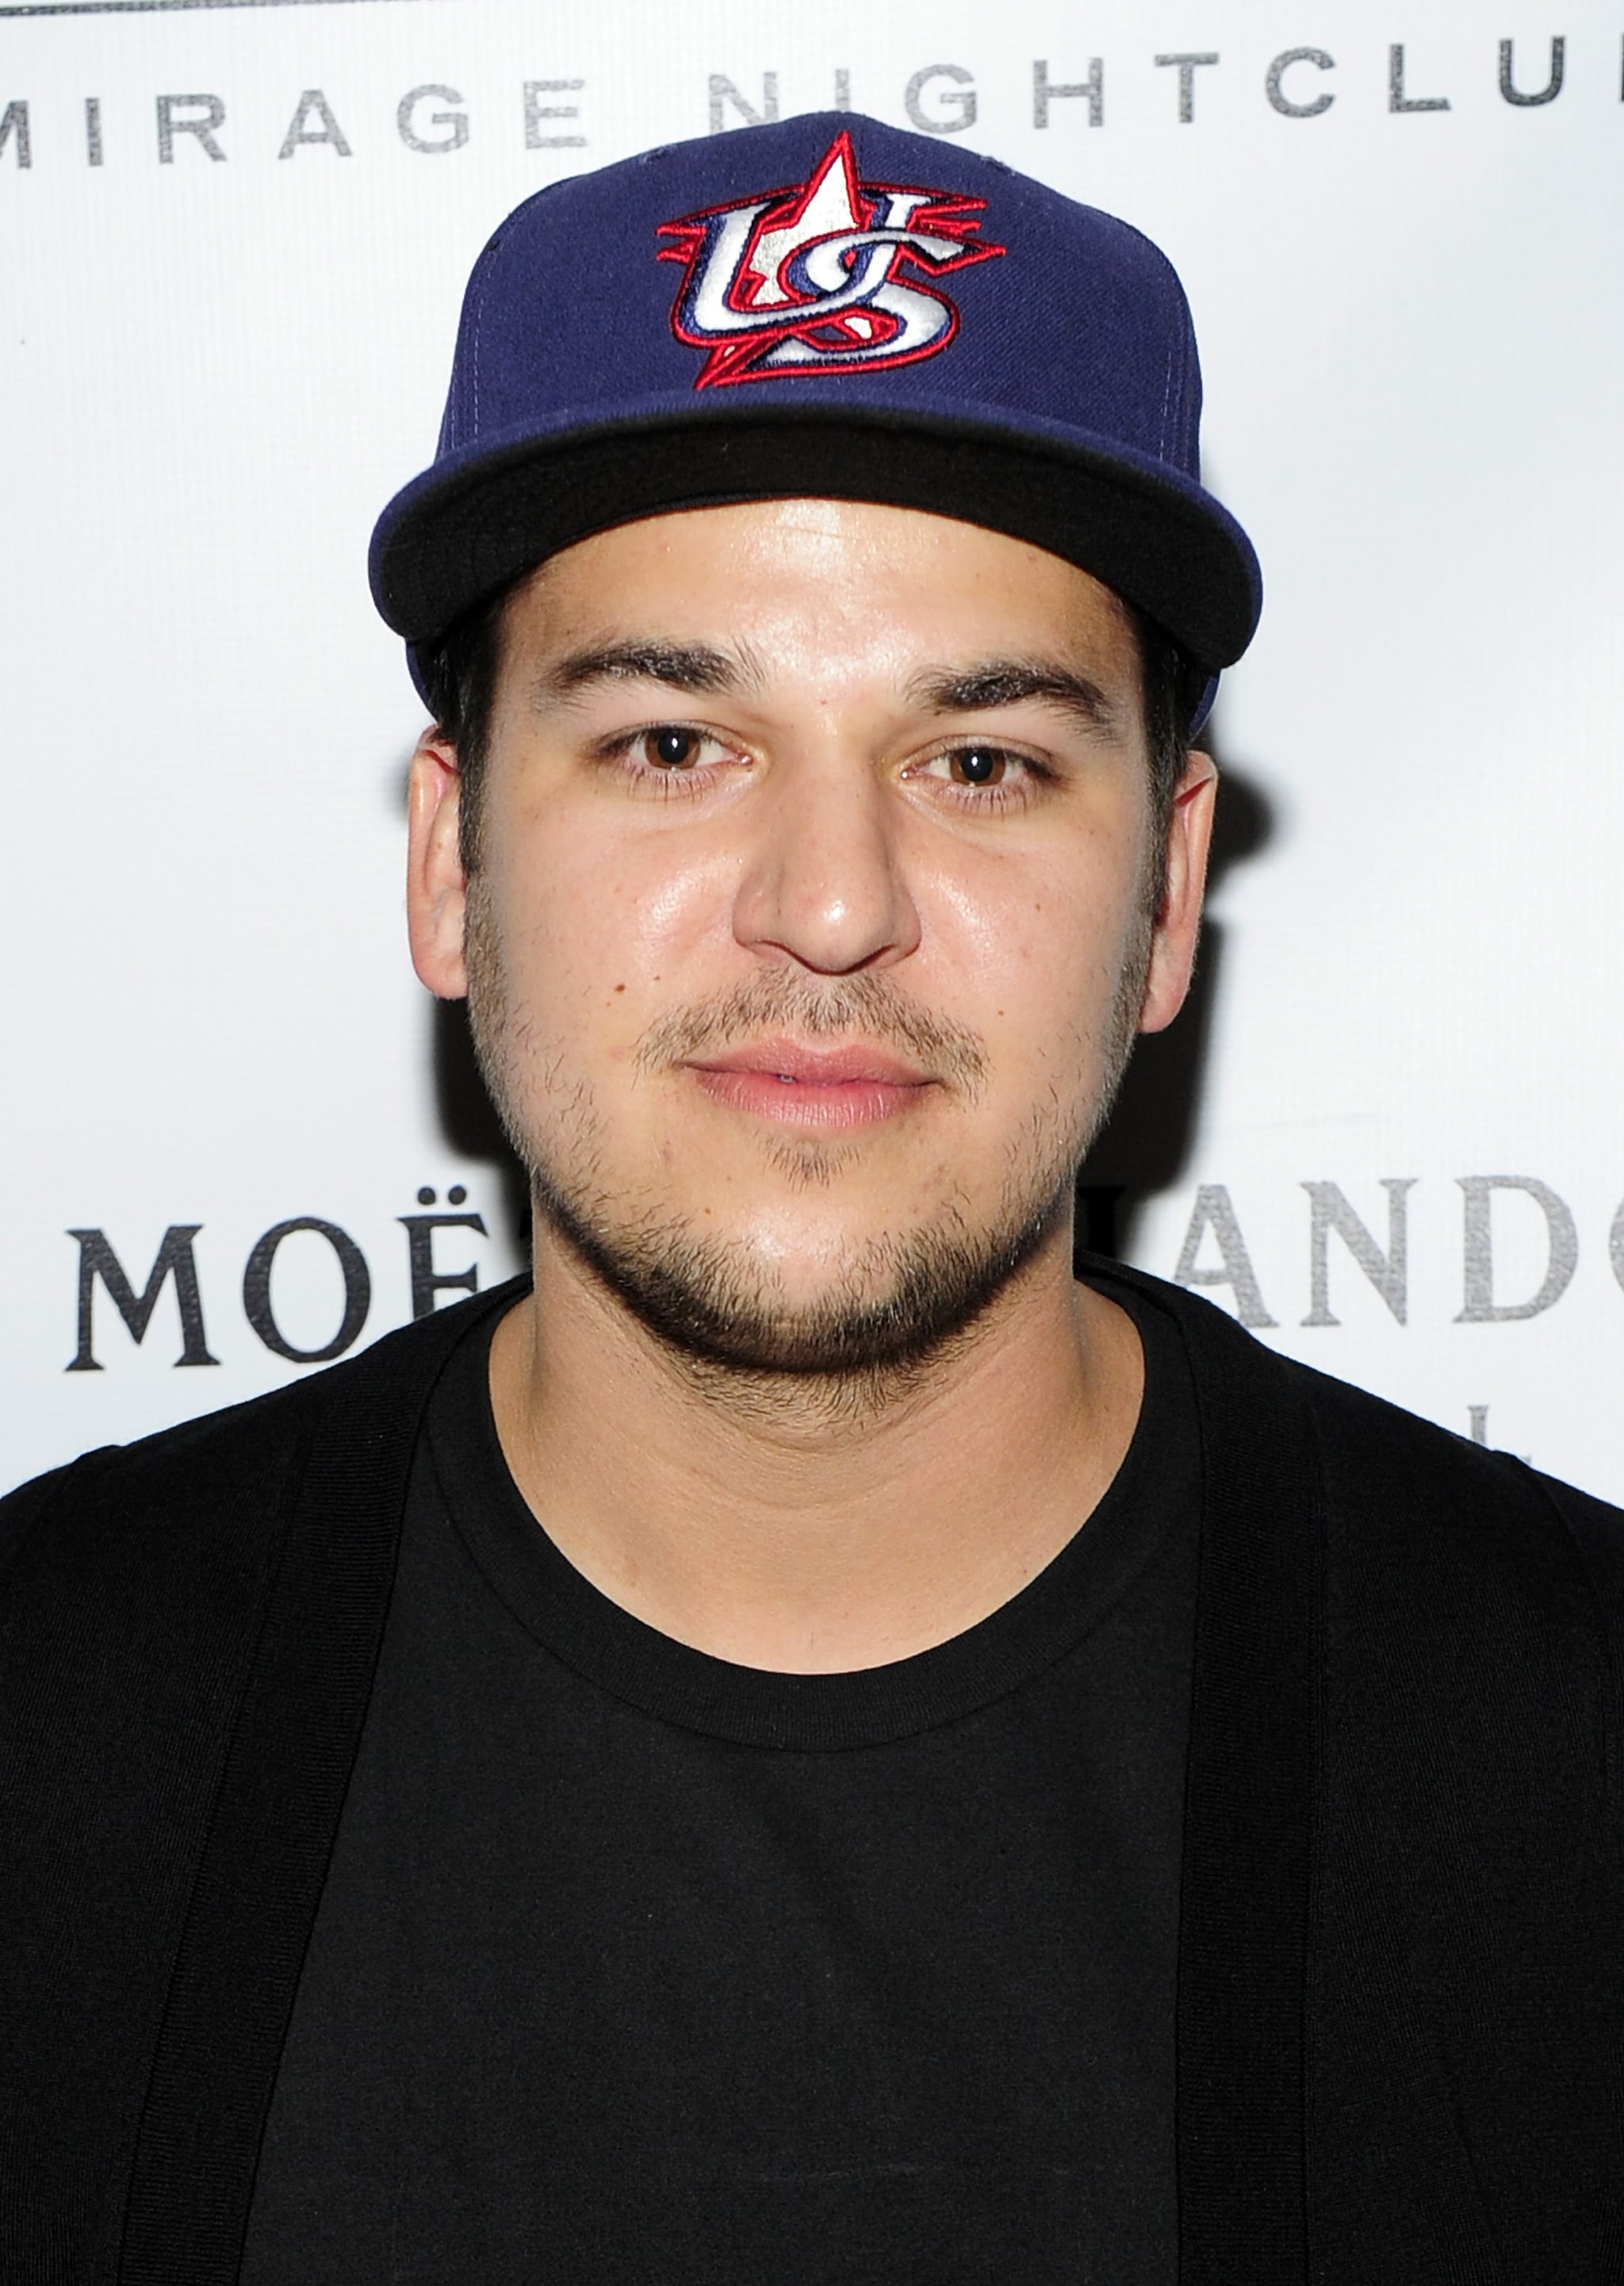 LAS VEGAS, NV - MAY 25:  Television personality Rob Kardashian arrives at 1 OAK Nightclub at The Mirage Hotel & Casino for a Memorial Day weekend celebration on May 25, 2013 in Las Vegas, Nevada.  (Photo by Steven Lawton/WireImage)